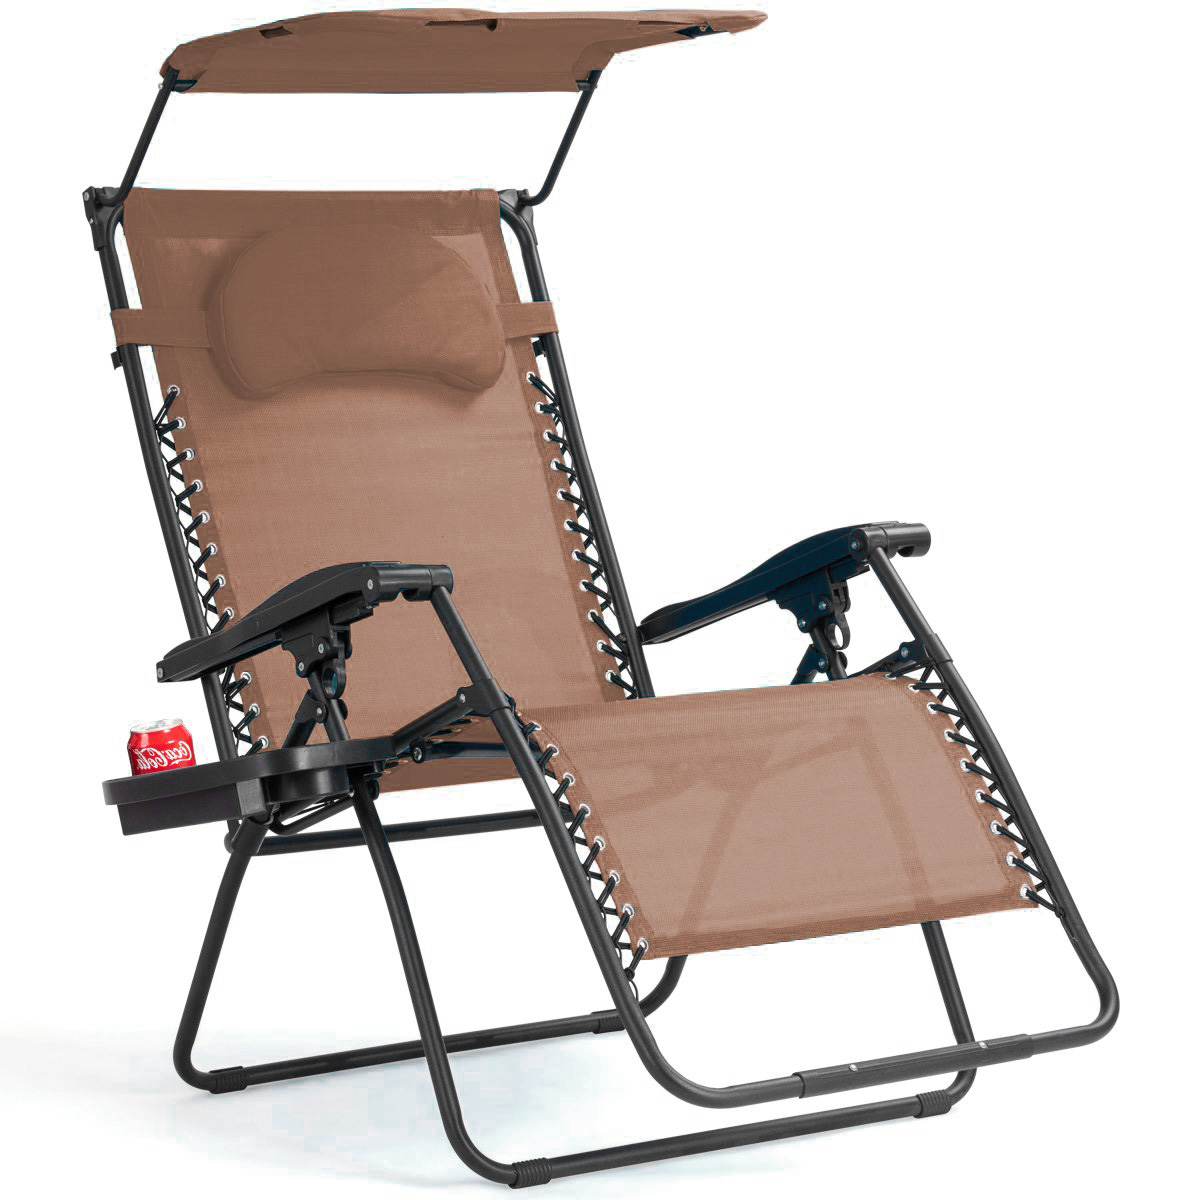 Folding Recliner Zero Gravity Lounge Chair W/ Shade Canopy Cup Holder Brown